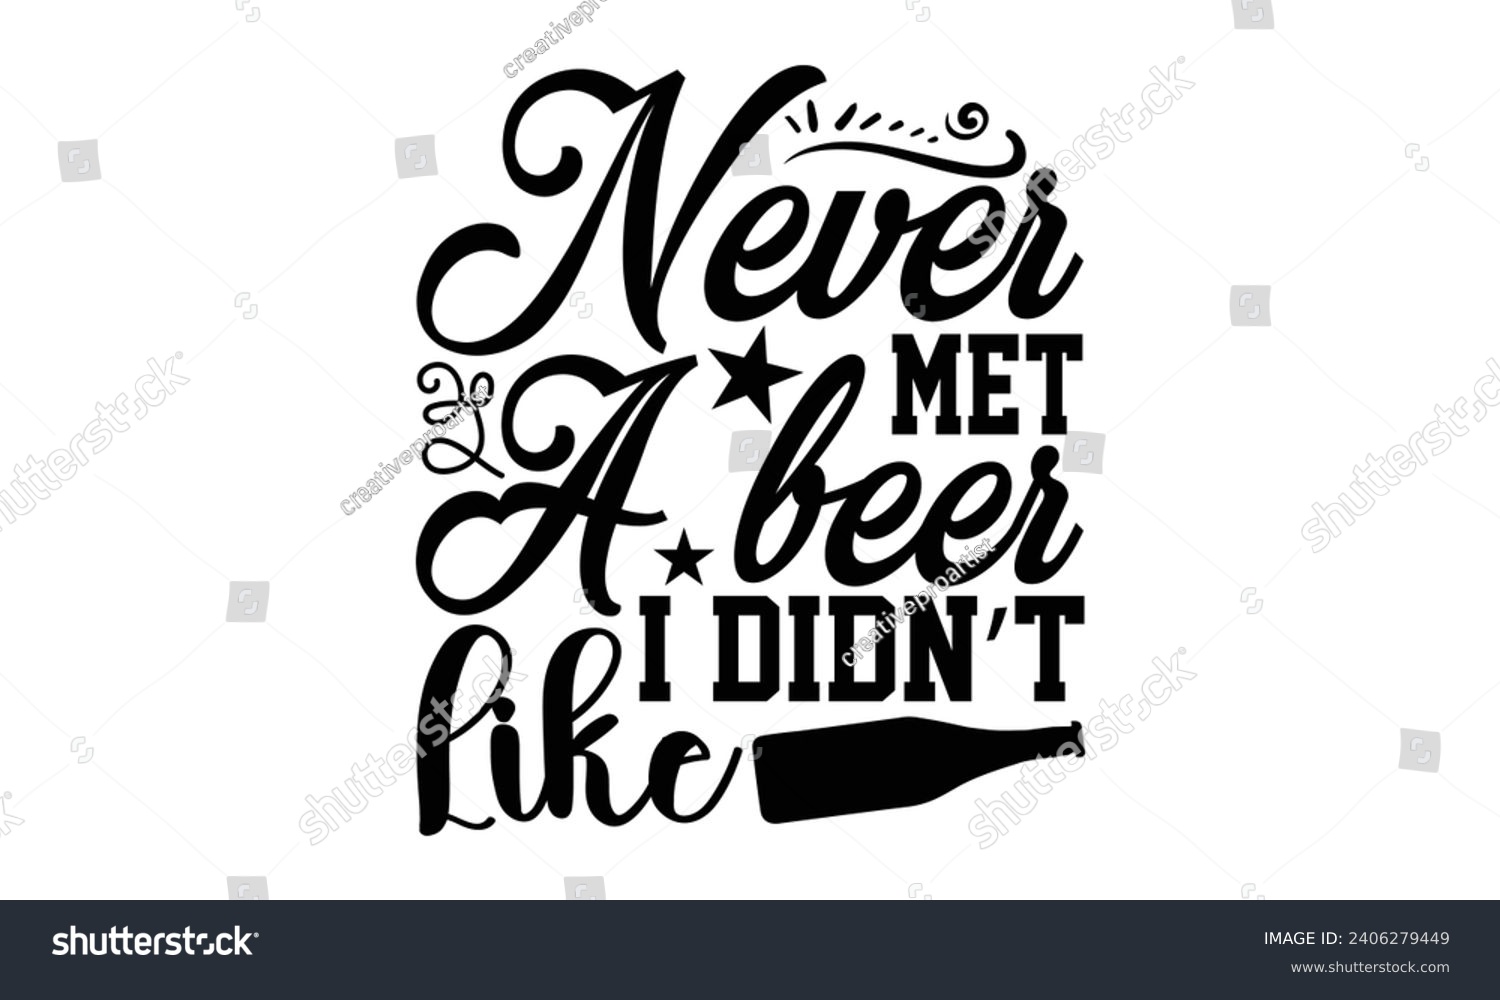 SVG of Never Met A Beer I Didn’t Like- Beer t- shirt design, Handmade calligraphy vector illustration for Cutting Machine, Silhouette Cameo, Cricut, Vector illustration Template. svg